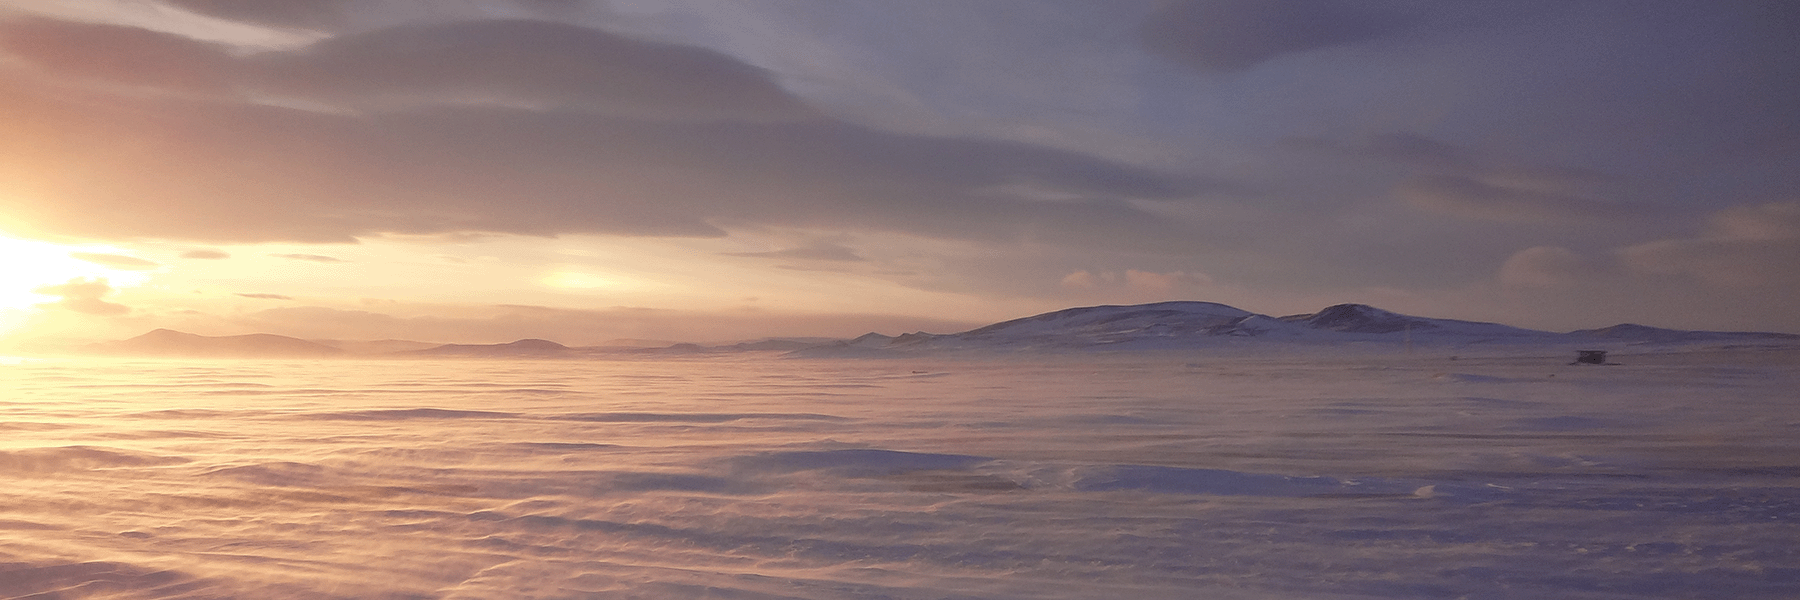 View of the Arctic landscape from the Tiksi, Russia observatory